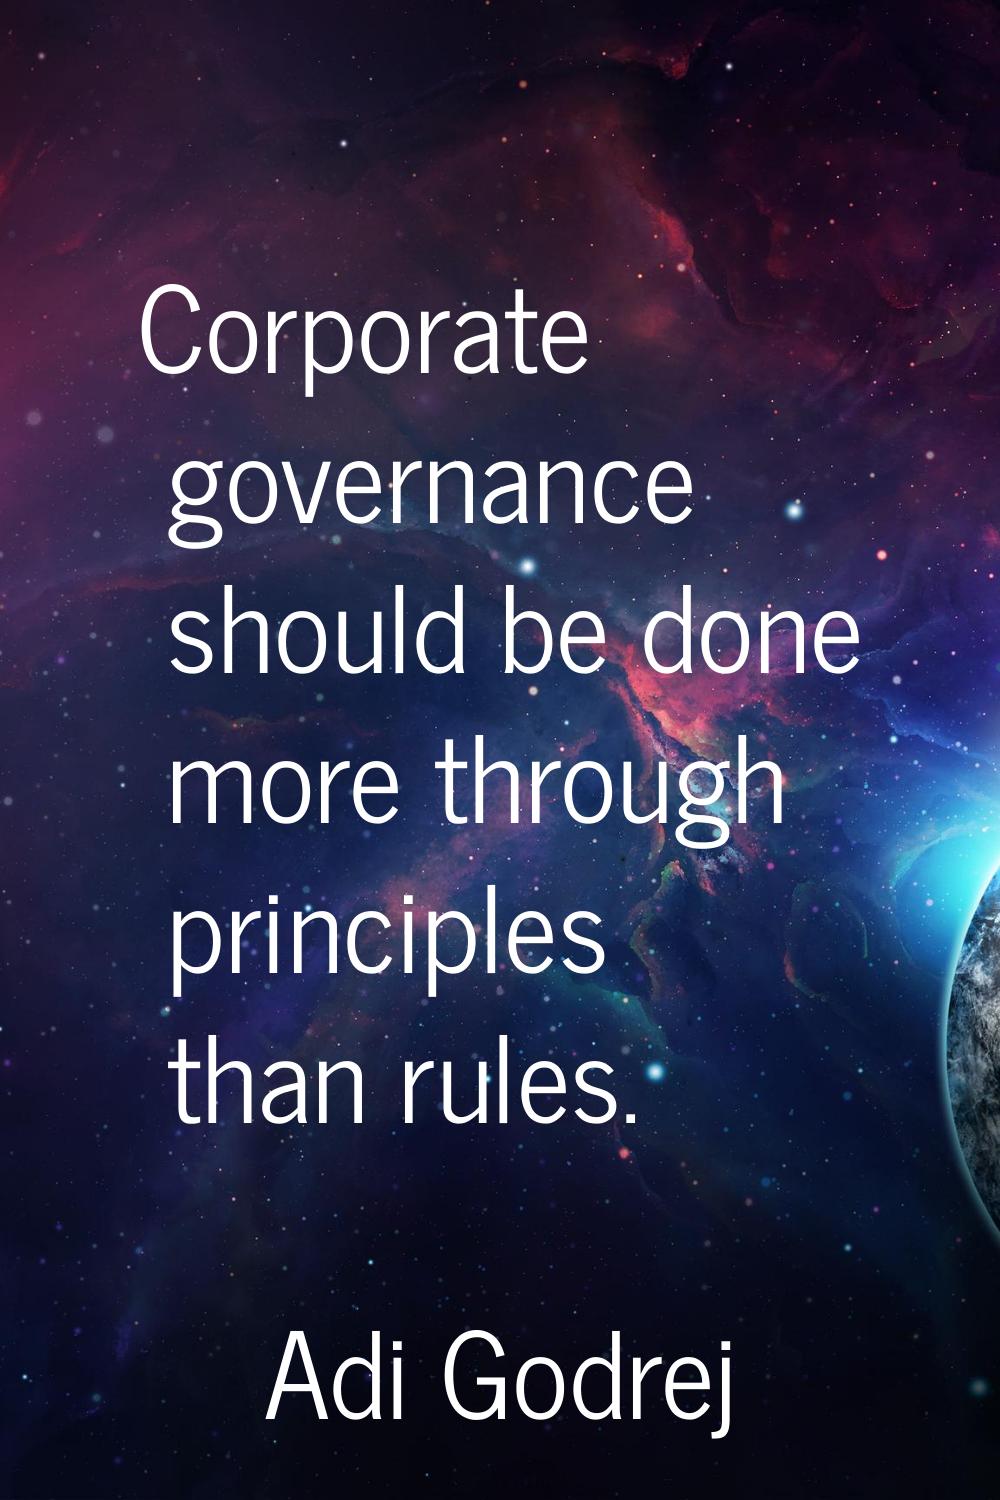 Corporate governance should be done more through principles than rules.